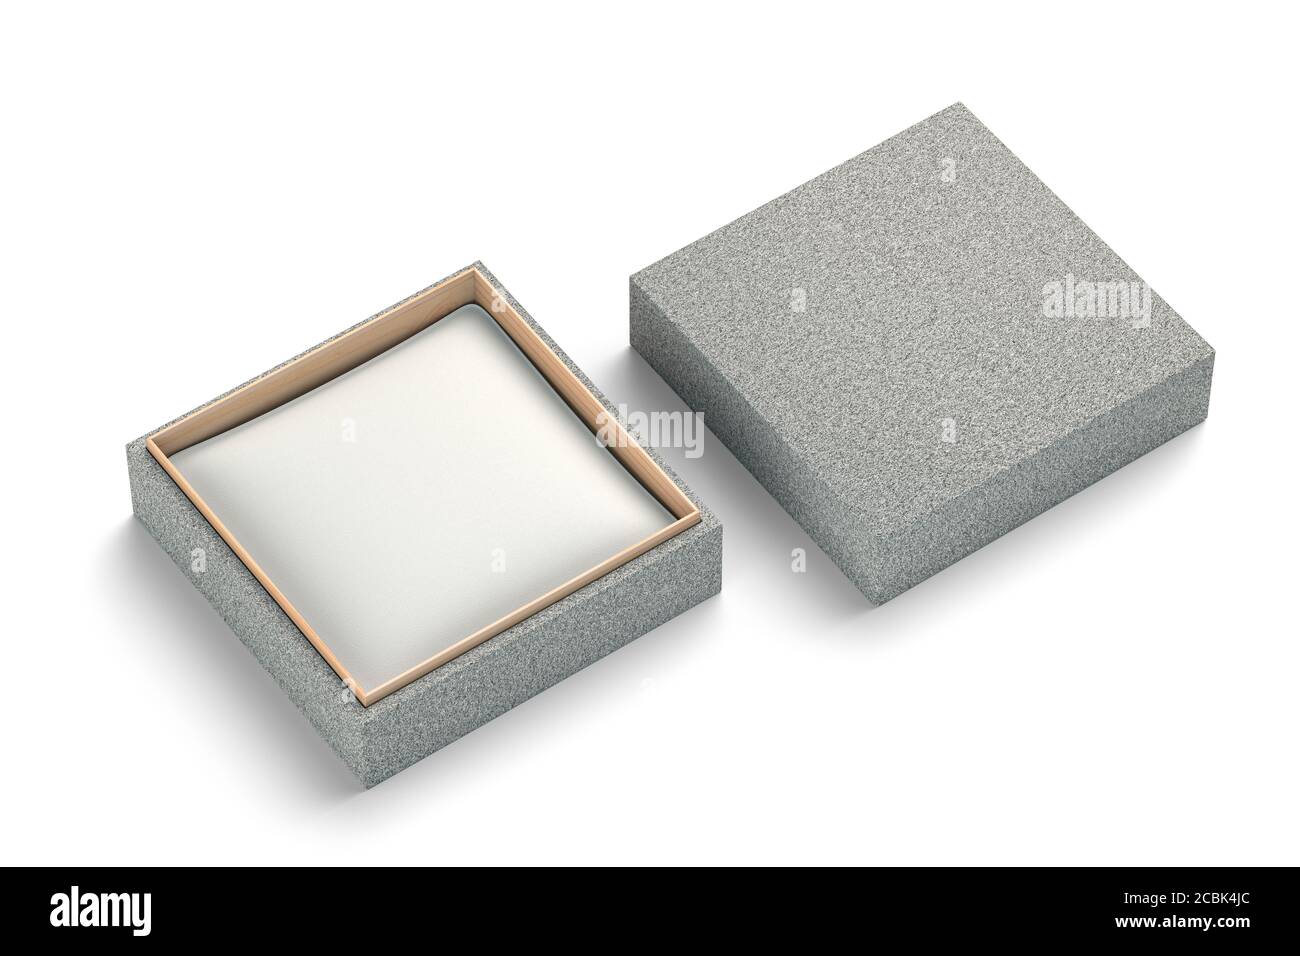 Download Gray Felt Craft Cardboard Jewelry Gift Box Mockup Wooden Inner Inset And White Pillow Inside For Branding And Identity Isolated Stock Photo Alamy